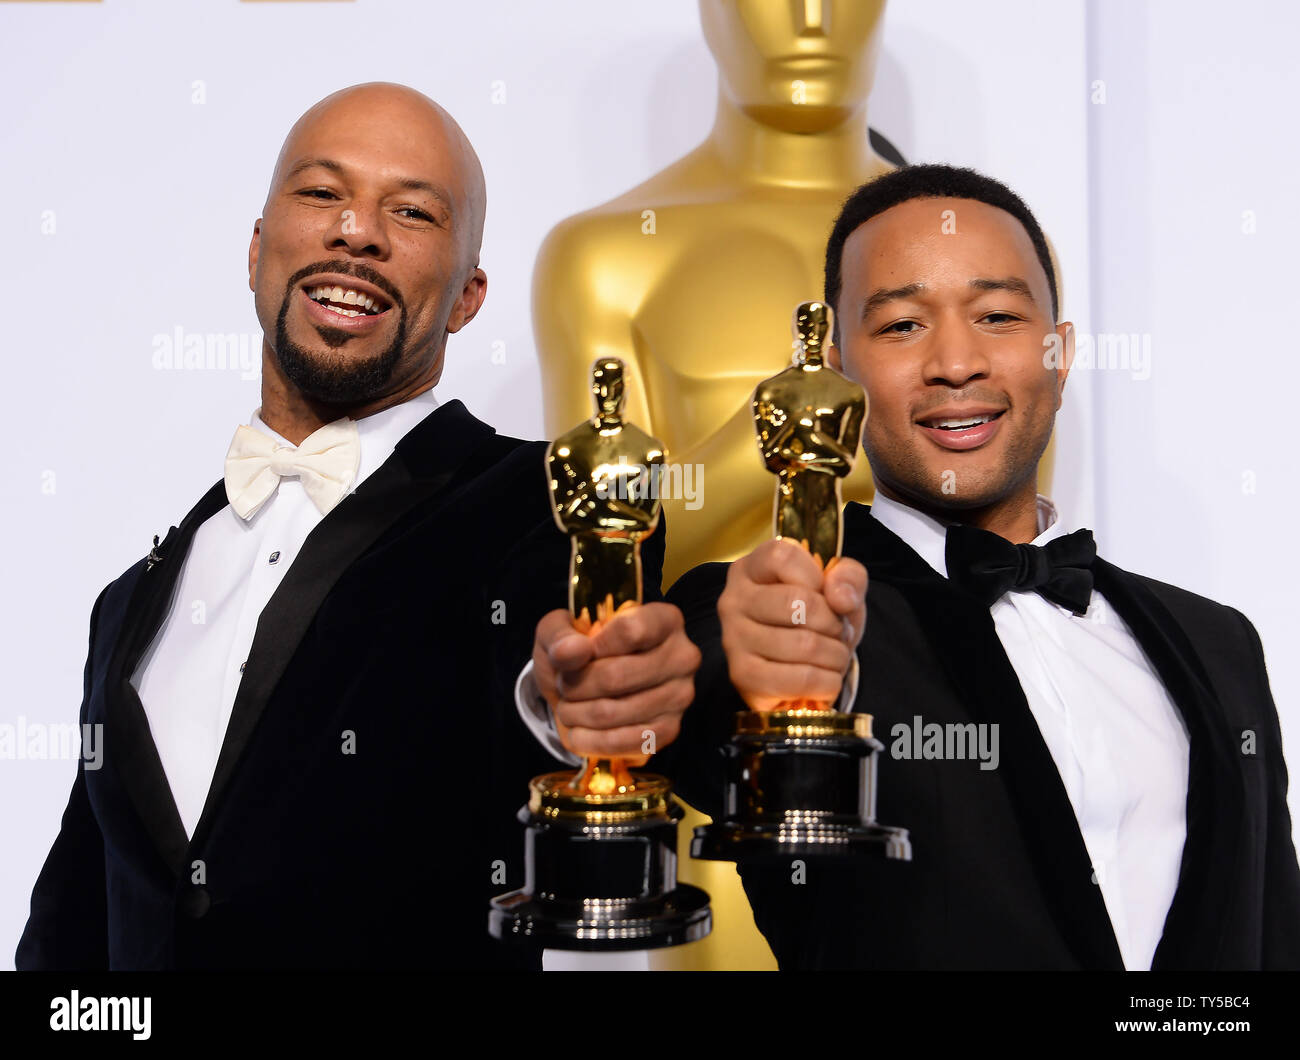 Lonnie Rashid Lynn, Jr. 'Common' and John Legend, winners of Best Song for 'Glory' in Selma, pose backstage with his Oscar during the 87th Academy Awards at the Hollywood & Highland Center in Los Angeles on February 22, 2015. Photo by Jim Ruymen/UPI Stock Photo